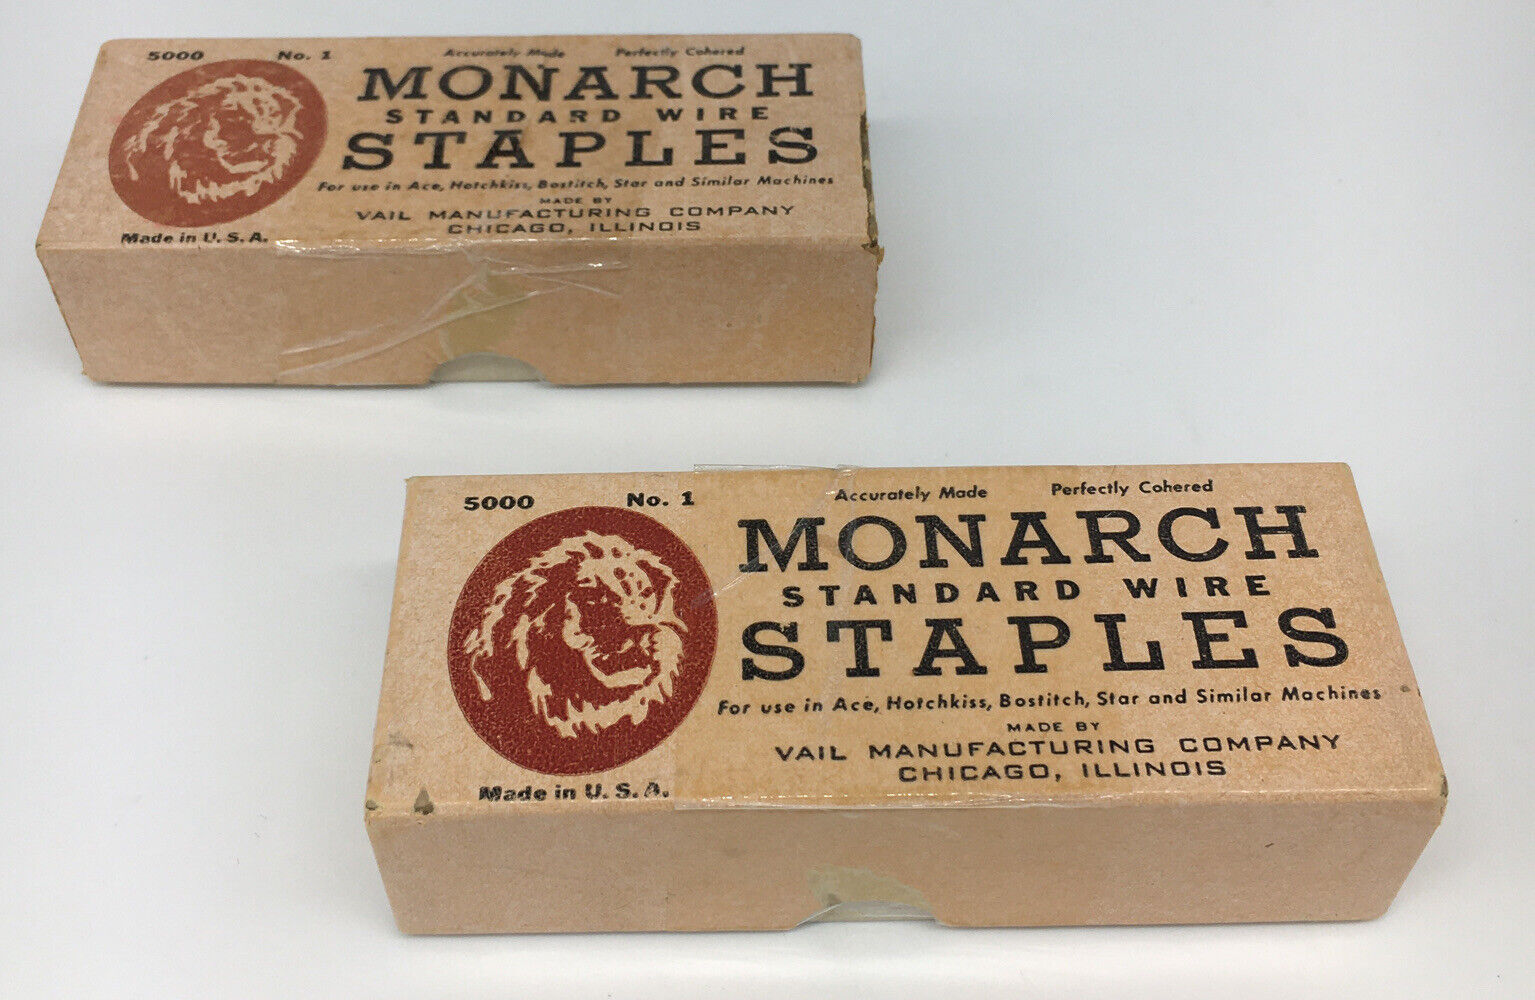 Vintage 1950’s Monarch Standard Wire Staples No. 1 Box Of 5000 (x2)